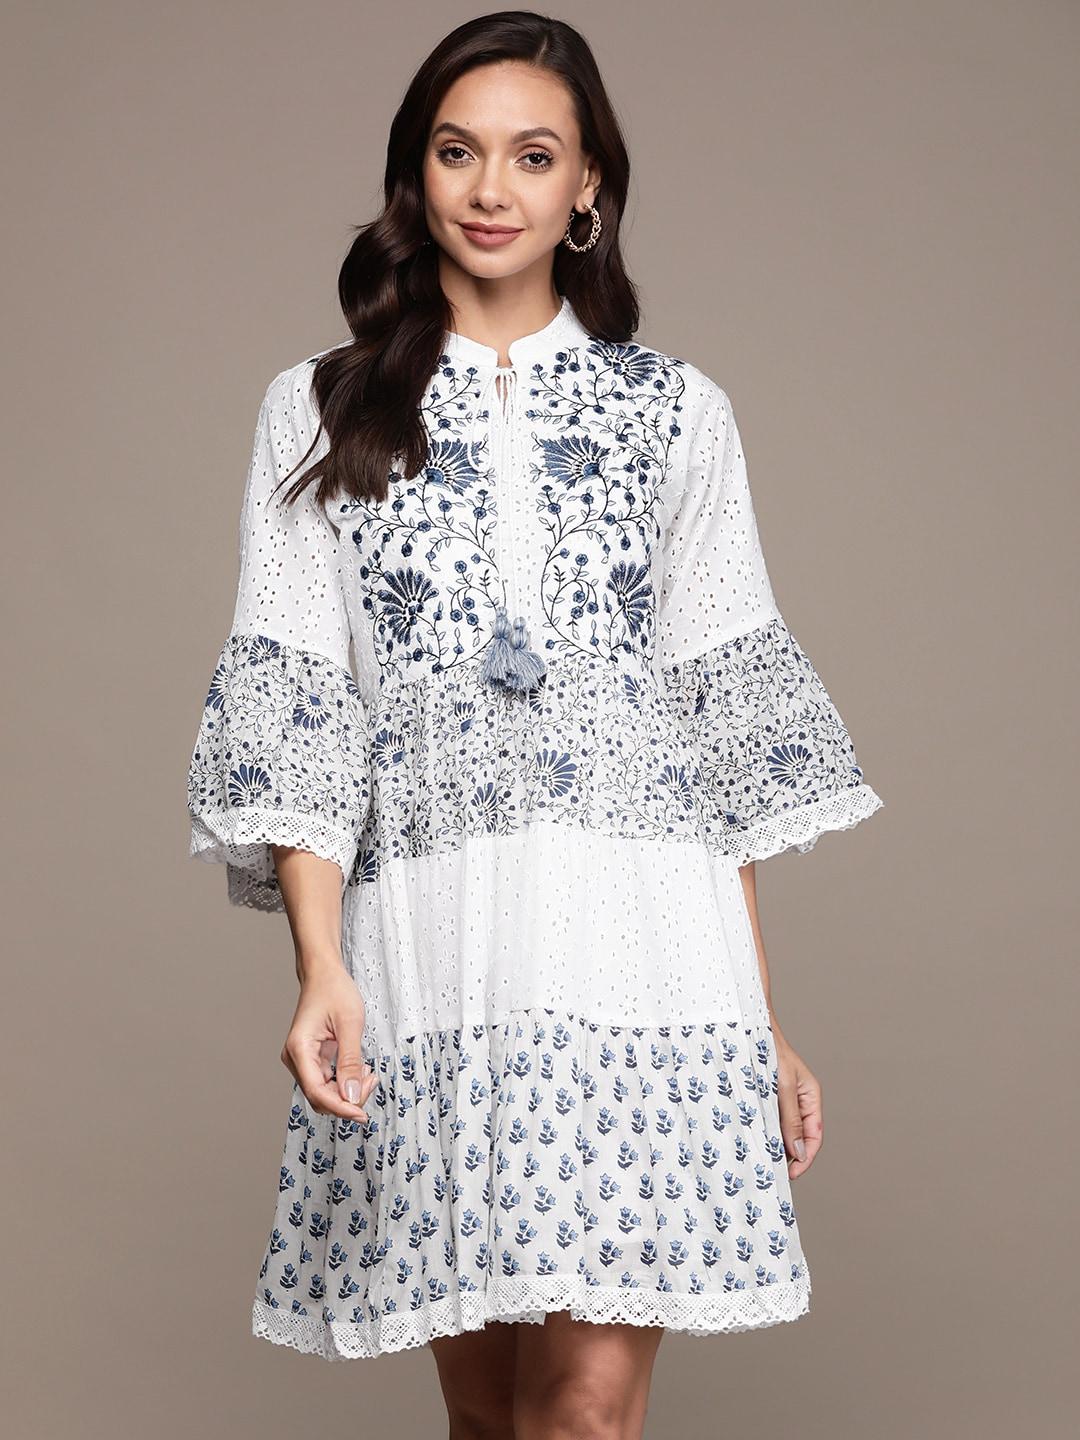 ishin white & navy blue floral embroidered tie-up neck a-line dress